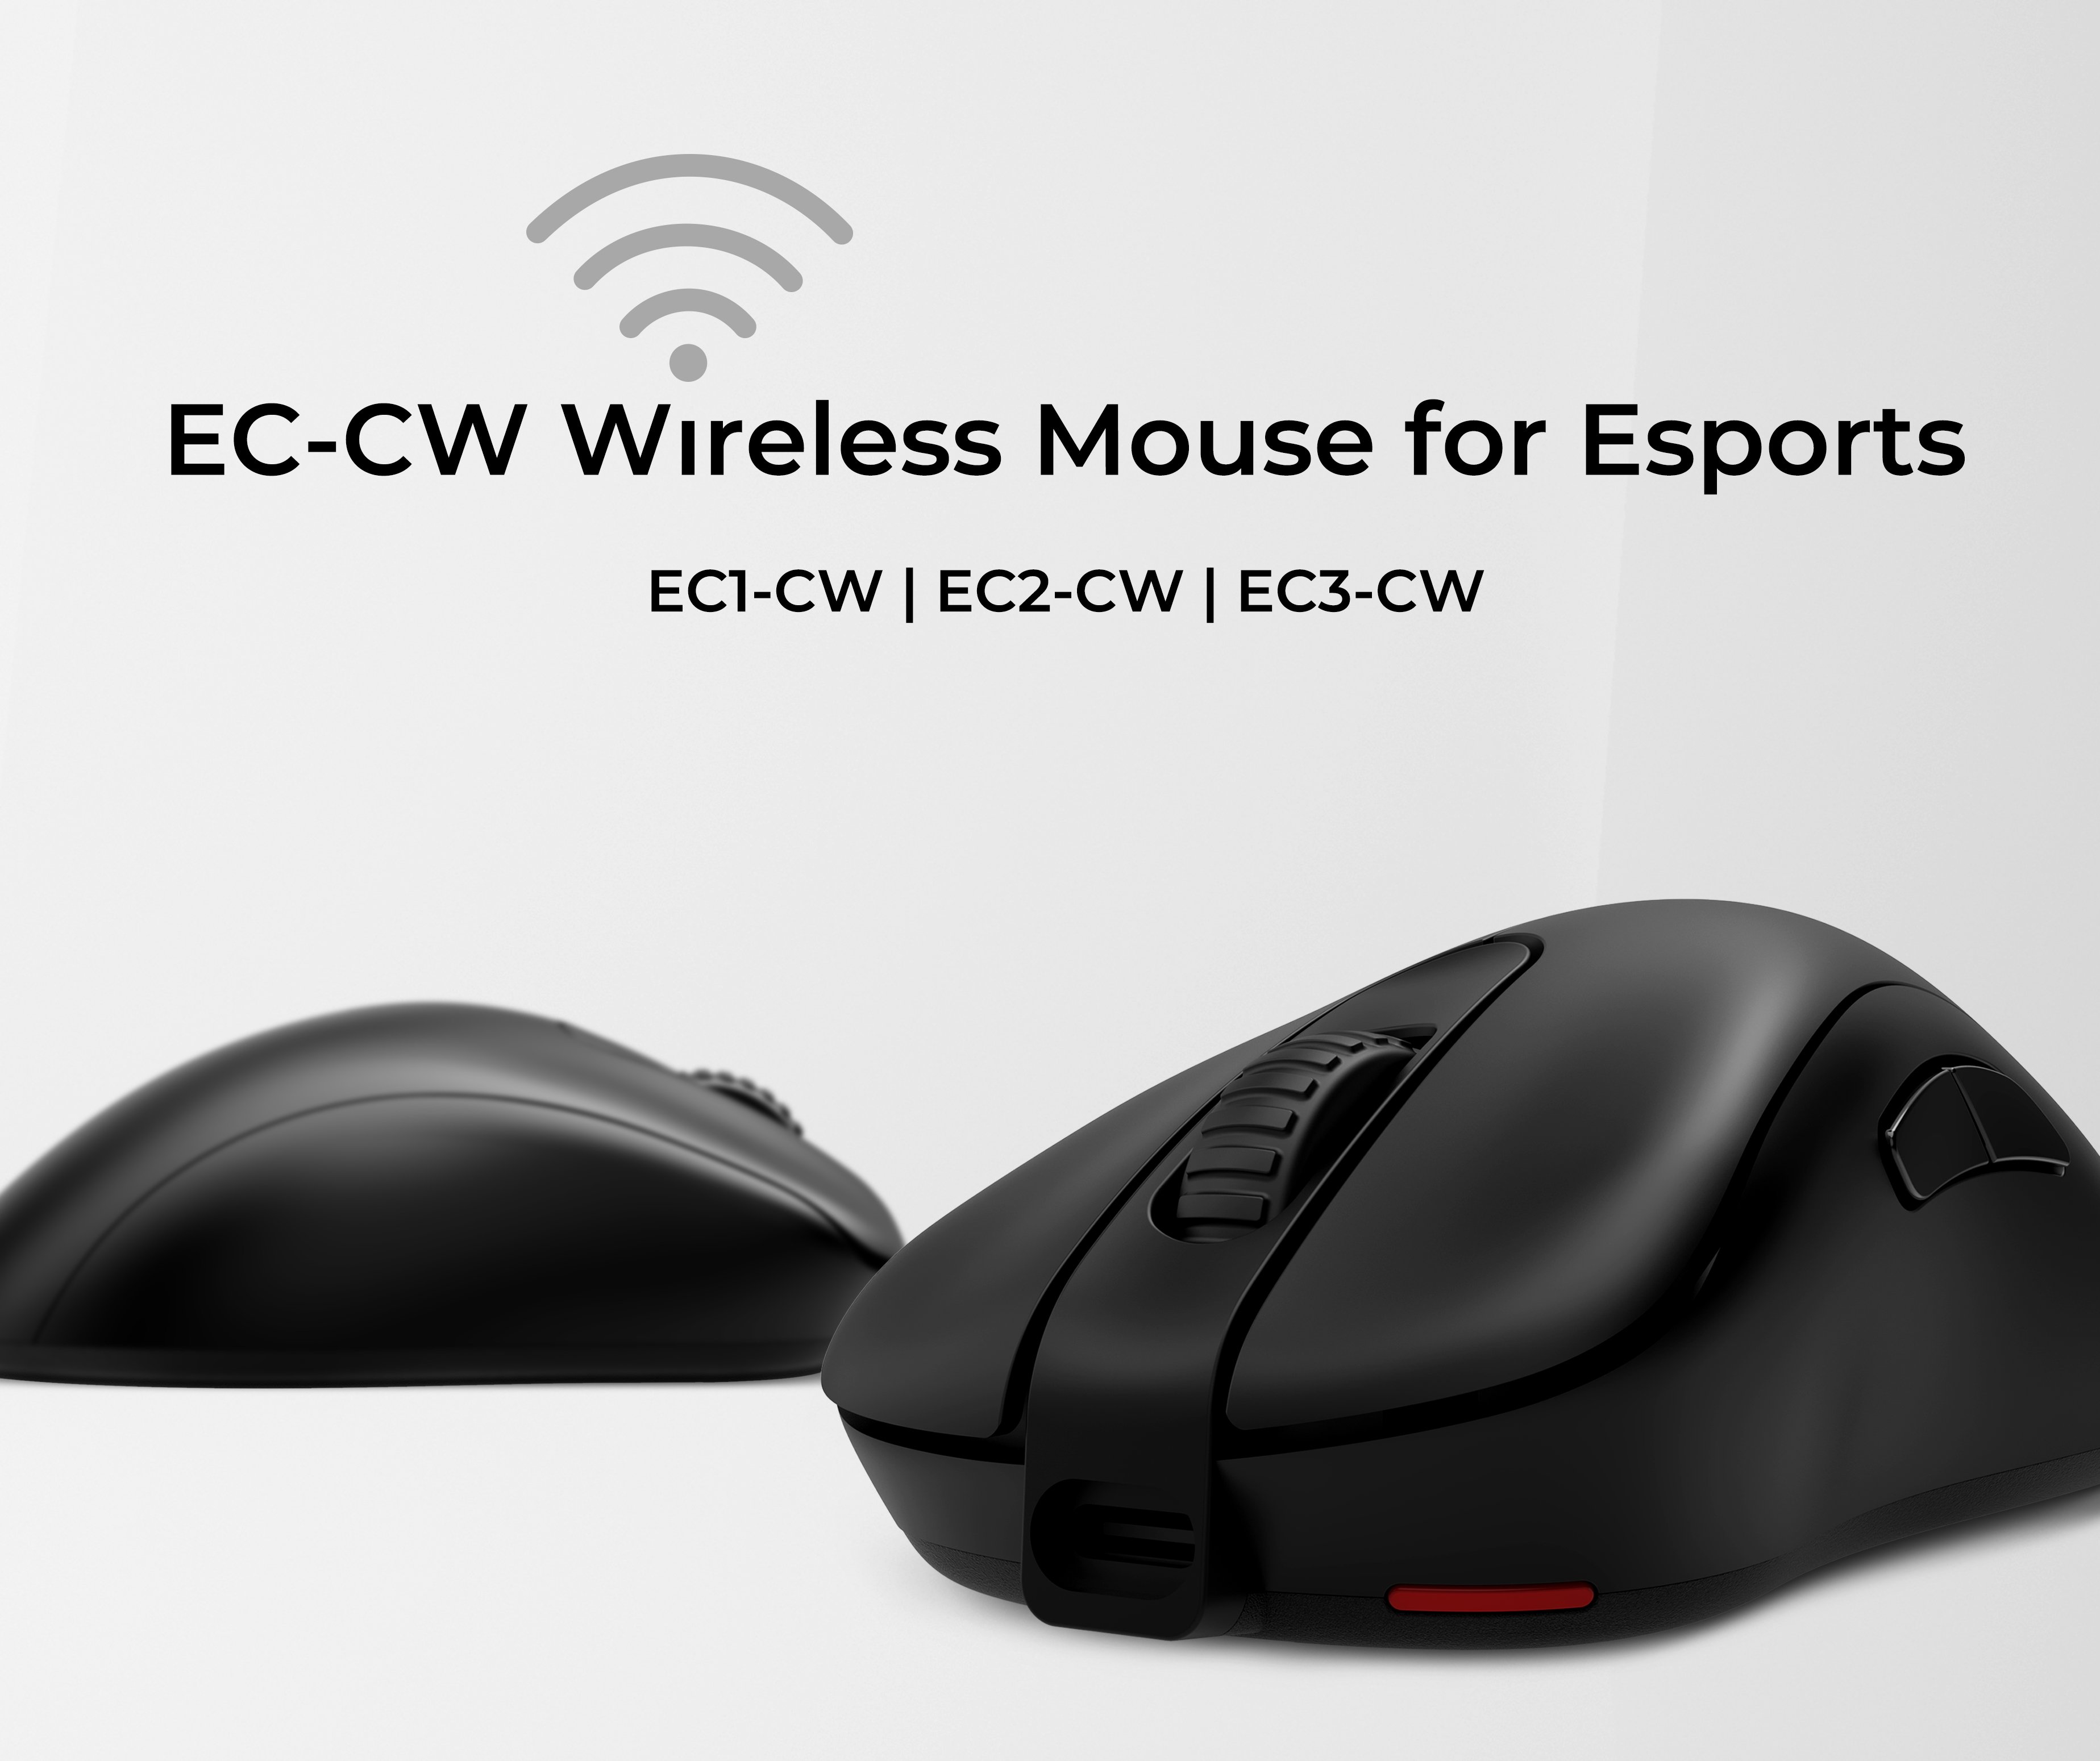 ZOWIE EC-CW Wireless Mouse for Esports 